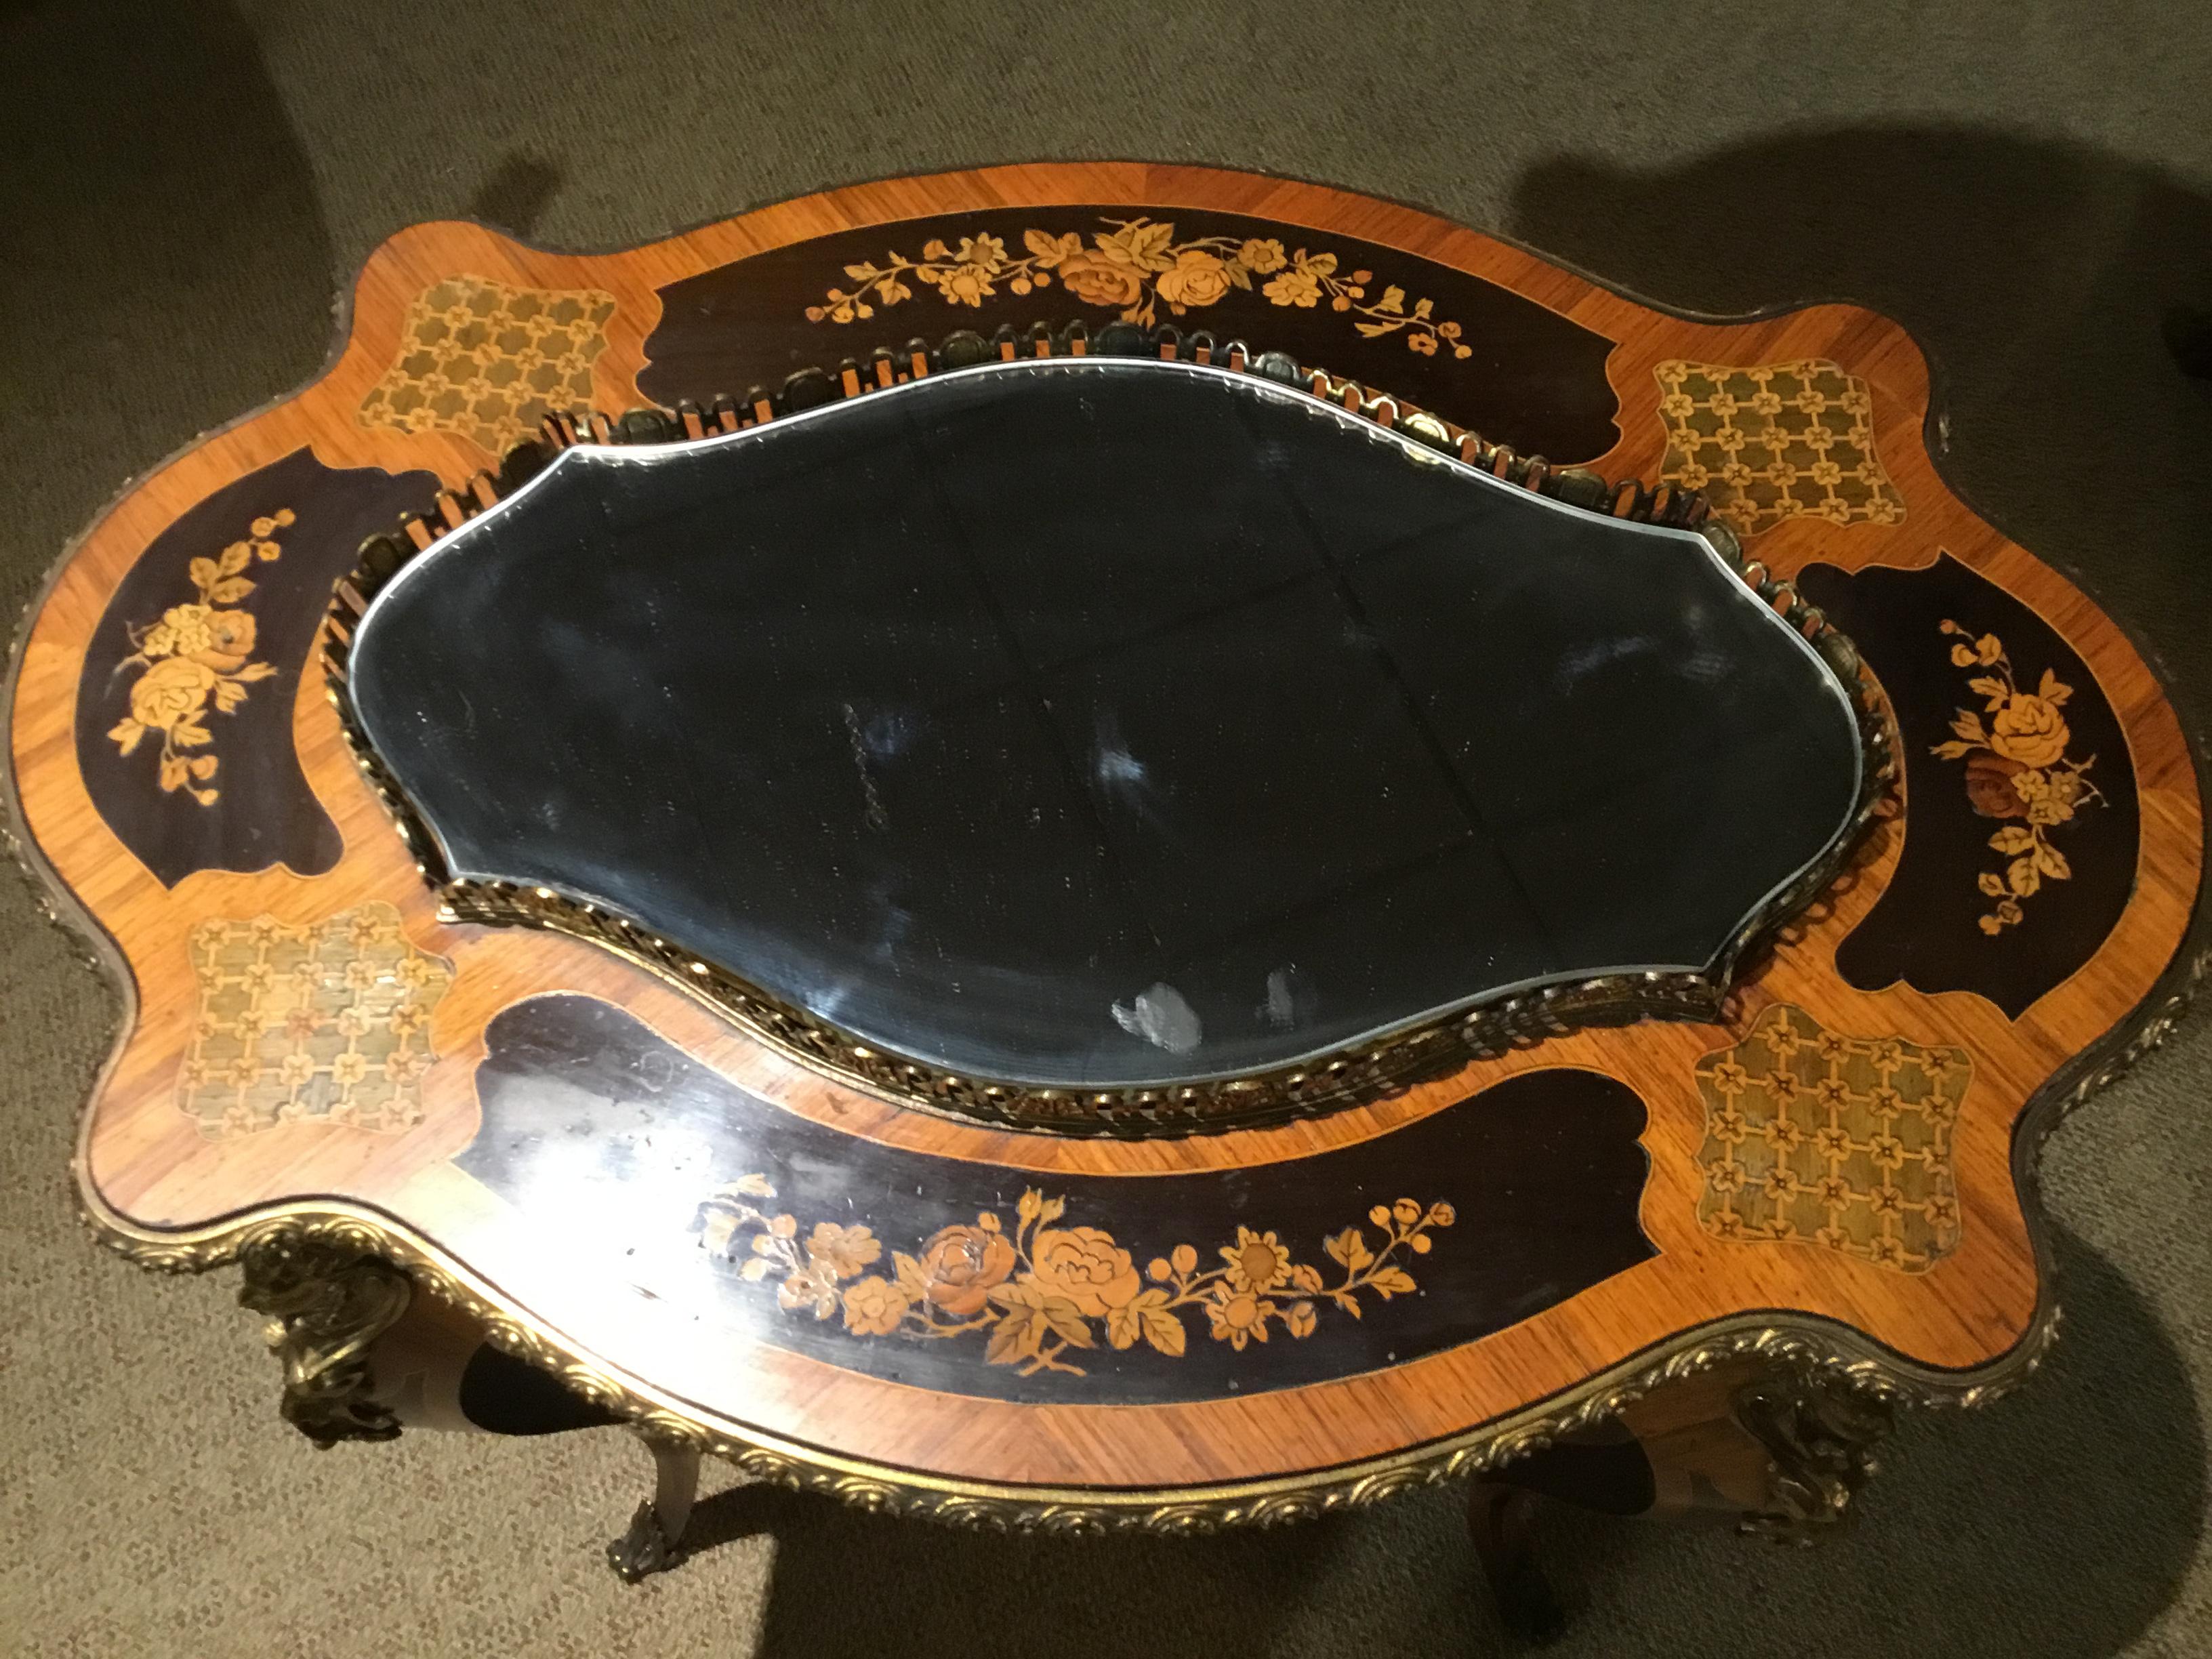 Marquetry of kingwood, satin wood, olive wood and ebony combined
To make an exceptional table. Foliate designs are centered on all
Four sides of this piece. The top is mirrored and has reticulated gallery.
Graceful oval shape and curved leg make